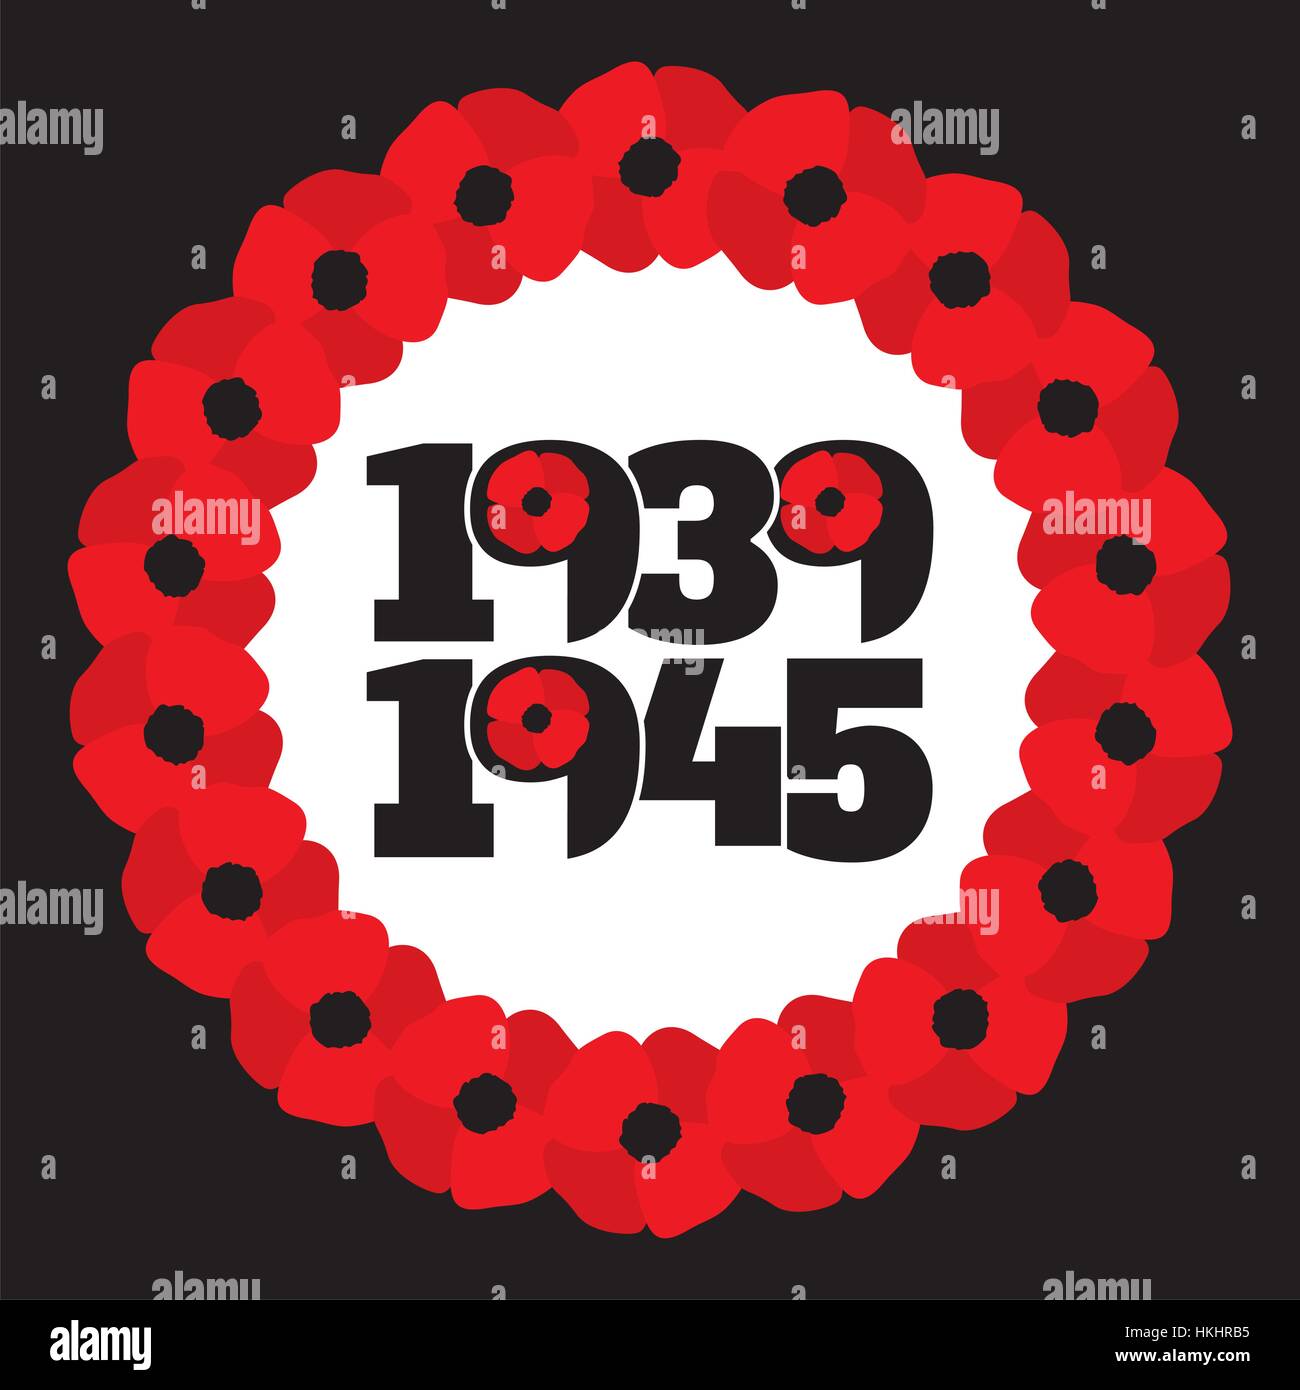 World War II commemorative symbol with dates 1939-1945, wreath with stylized poppies and phrase remember. Vector illustration in eps8 format. Stock Vector